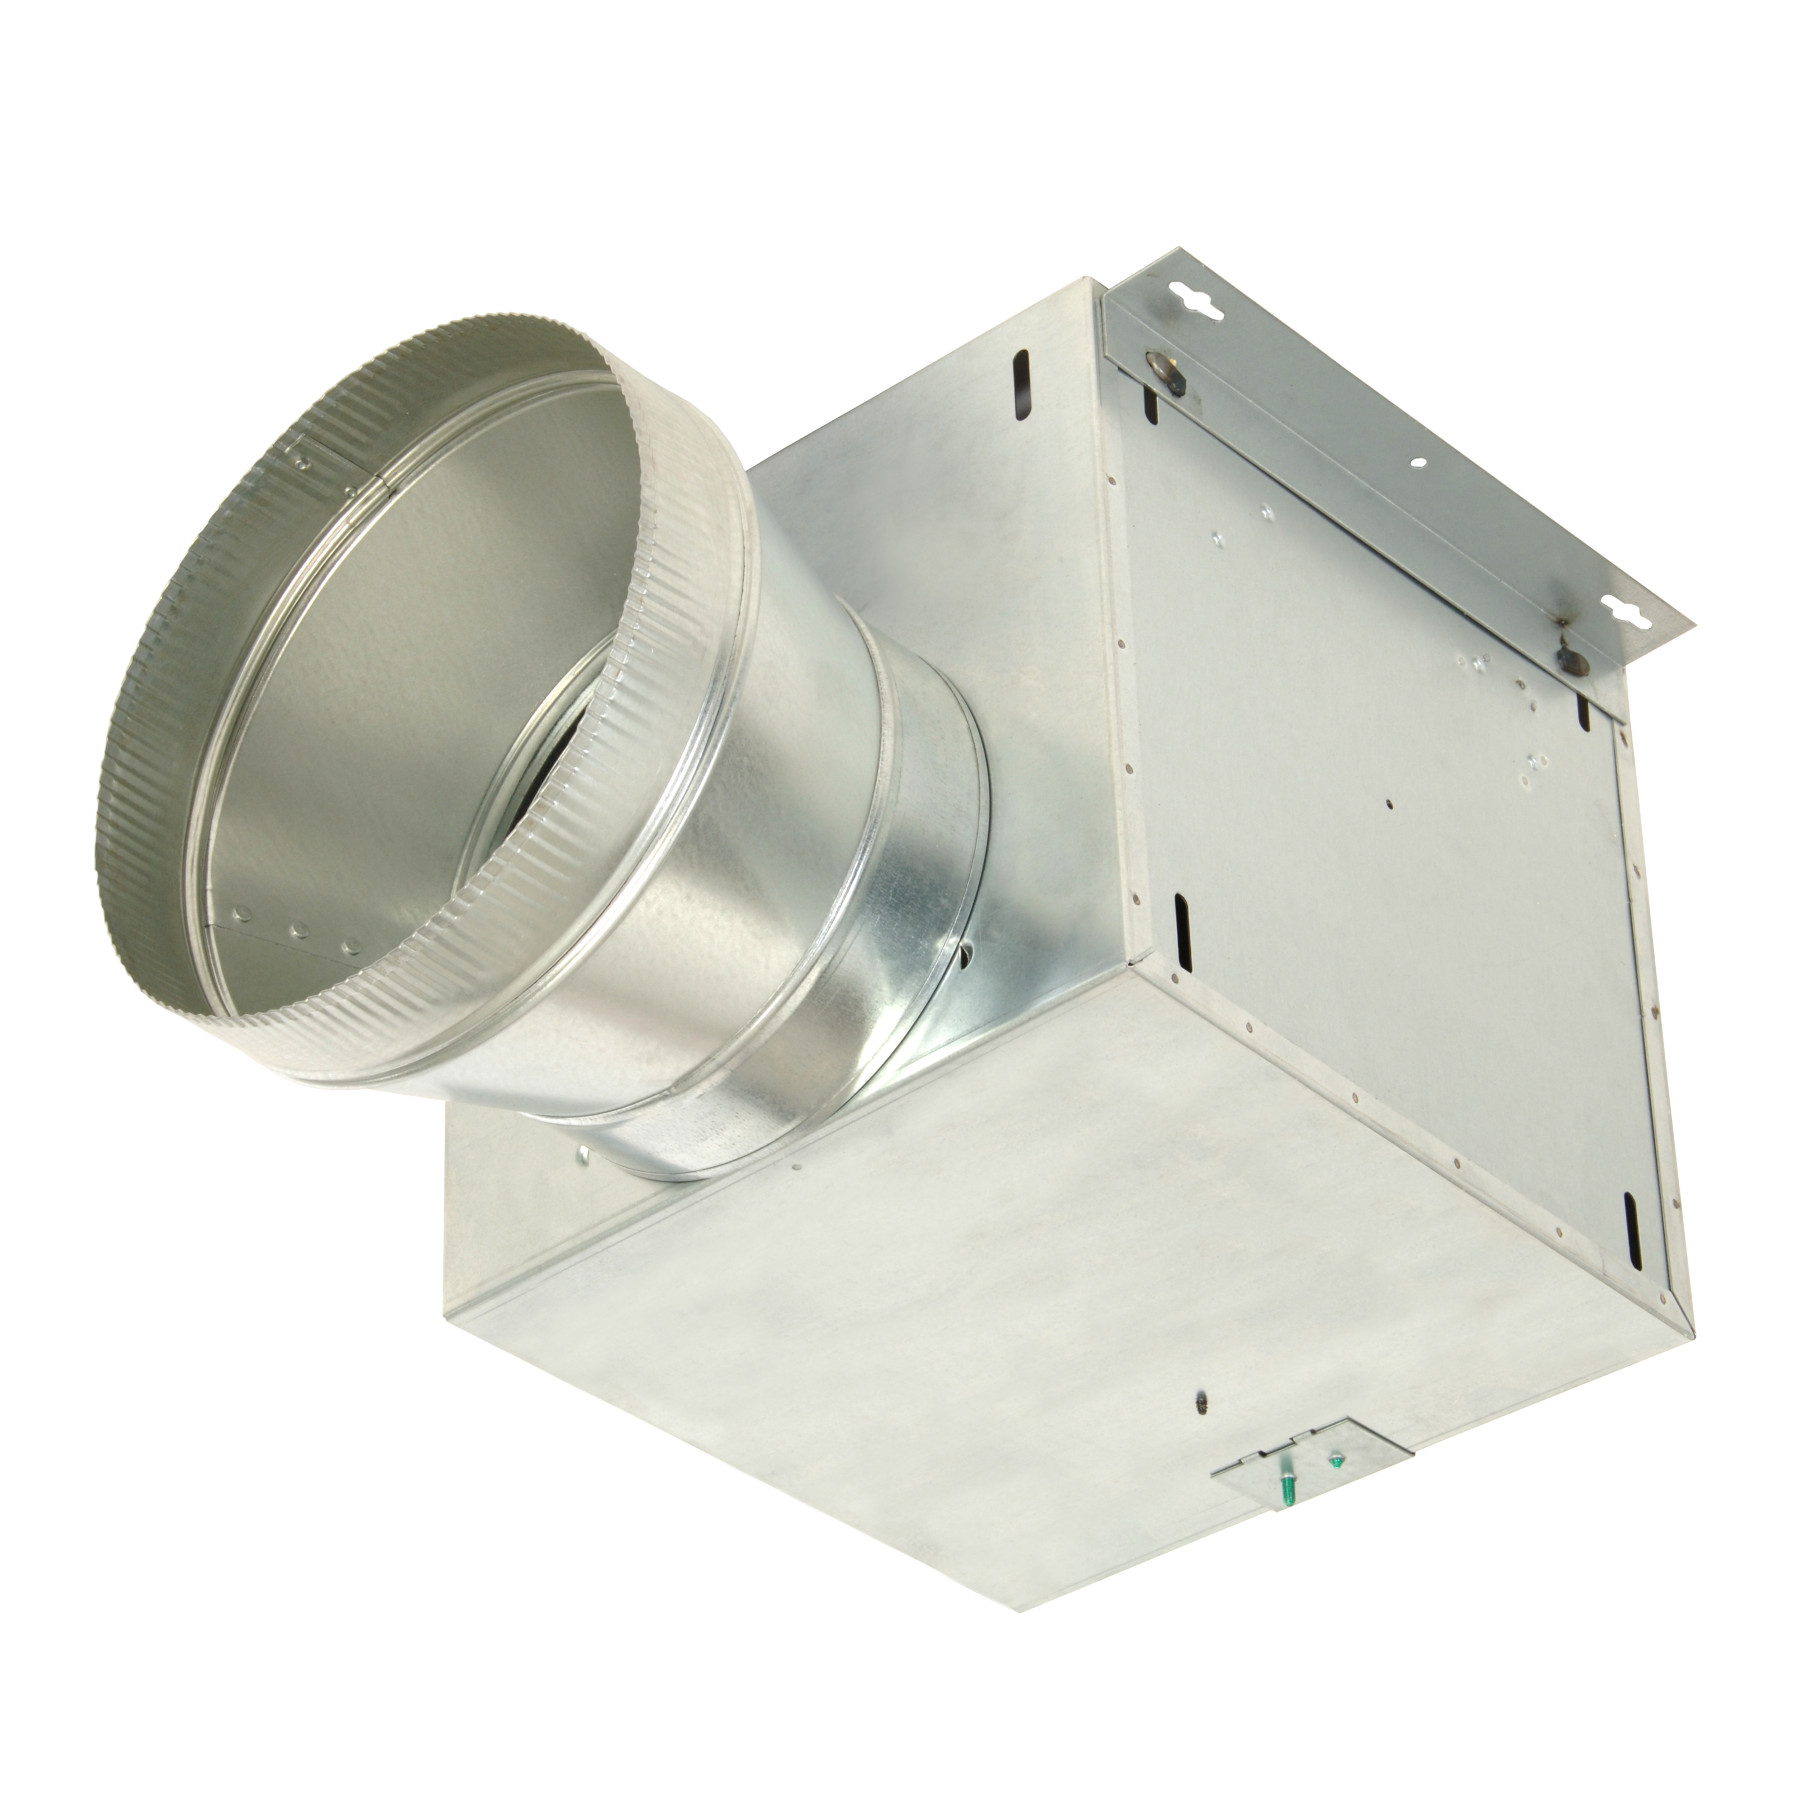 HLB3 320 Max In-Line Blower CFM for use with Broan® Range Hoods